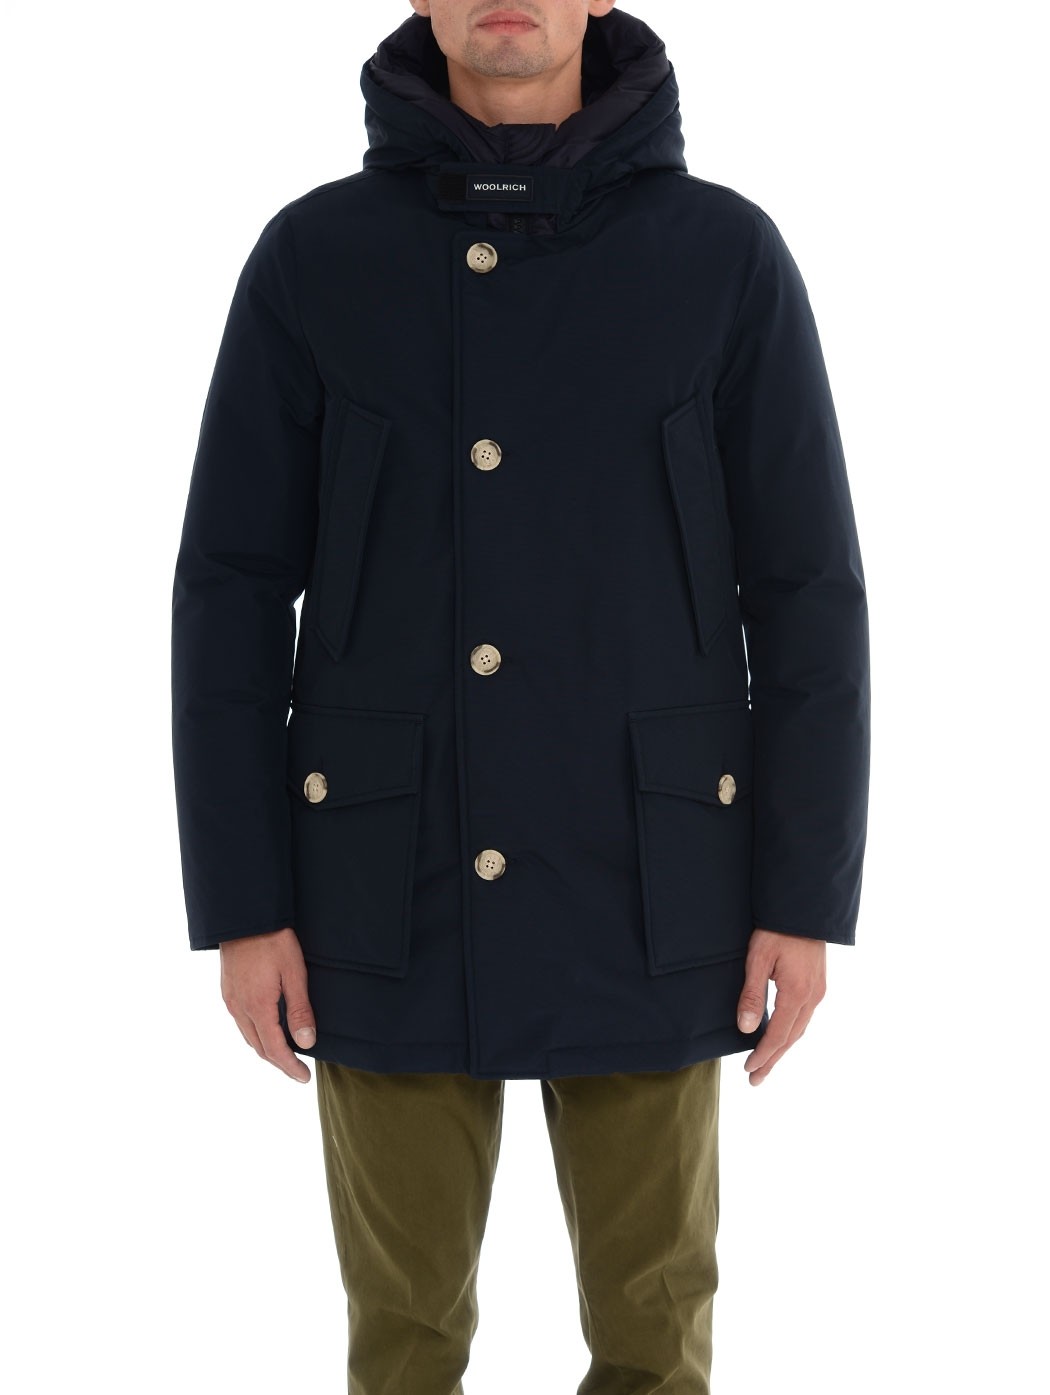  MAN COLLECTION,FALL WINTER,CHURCH'S,MONCLER,MONCLER GRENOBLE,HERNO,WOOLRICH,MSGM,NEIL BARRETT,STONE ISLAND,BLUNDSTONE  WOOLRICH WOOU0483MR